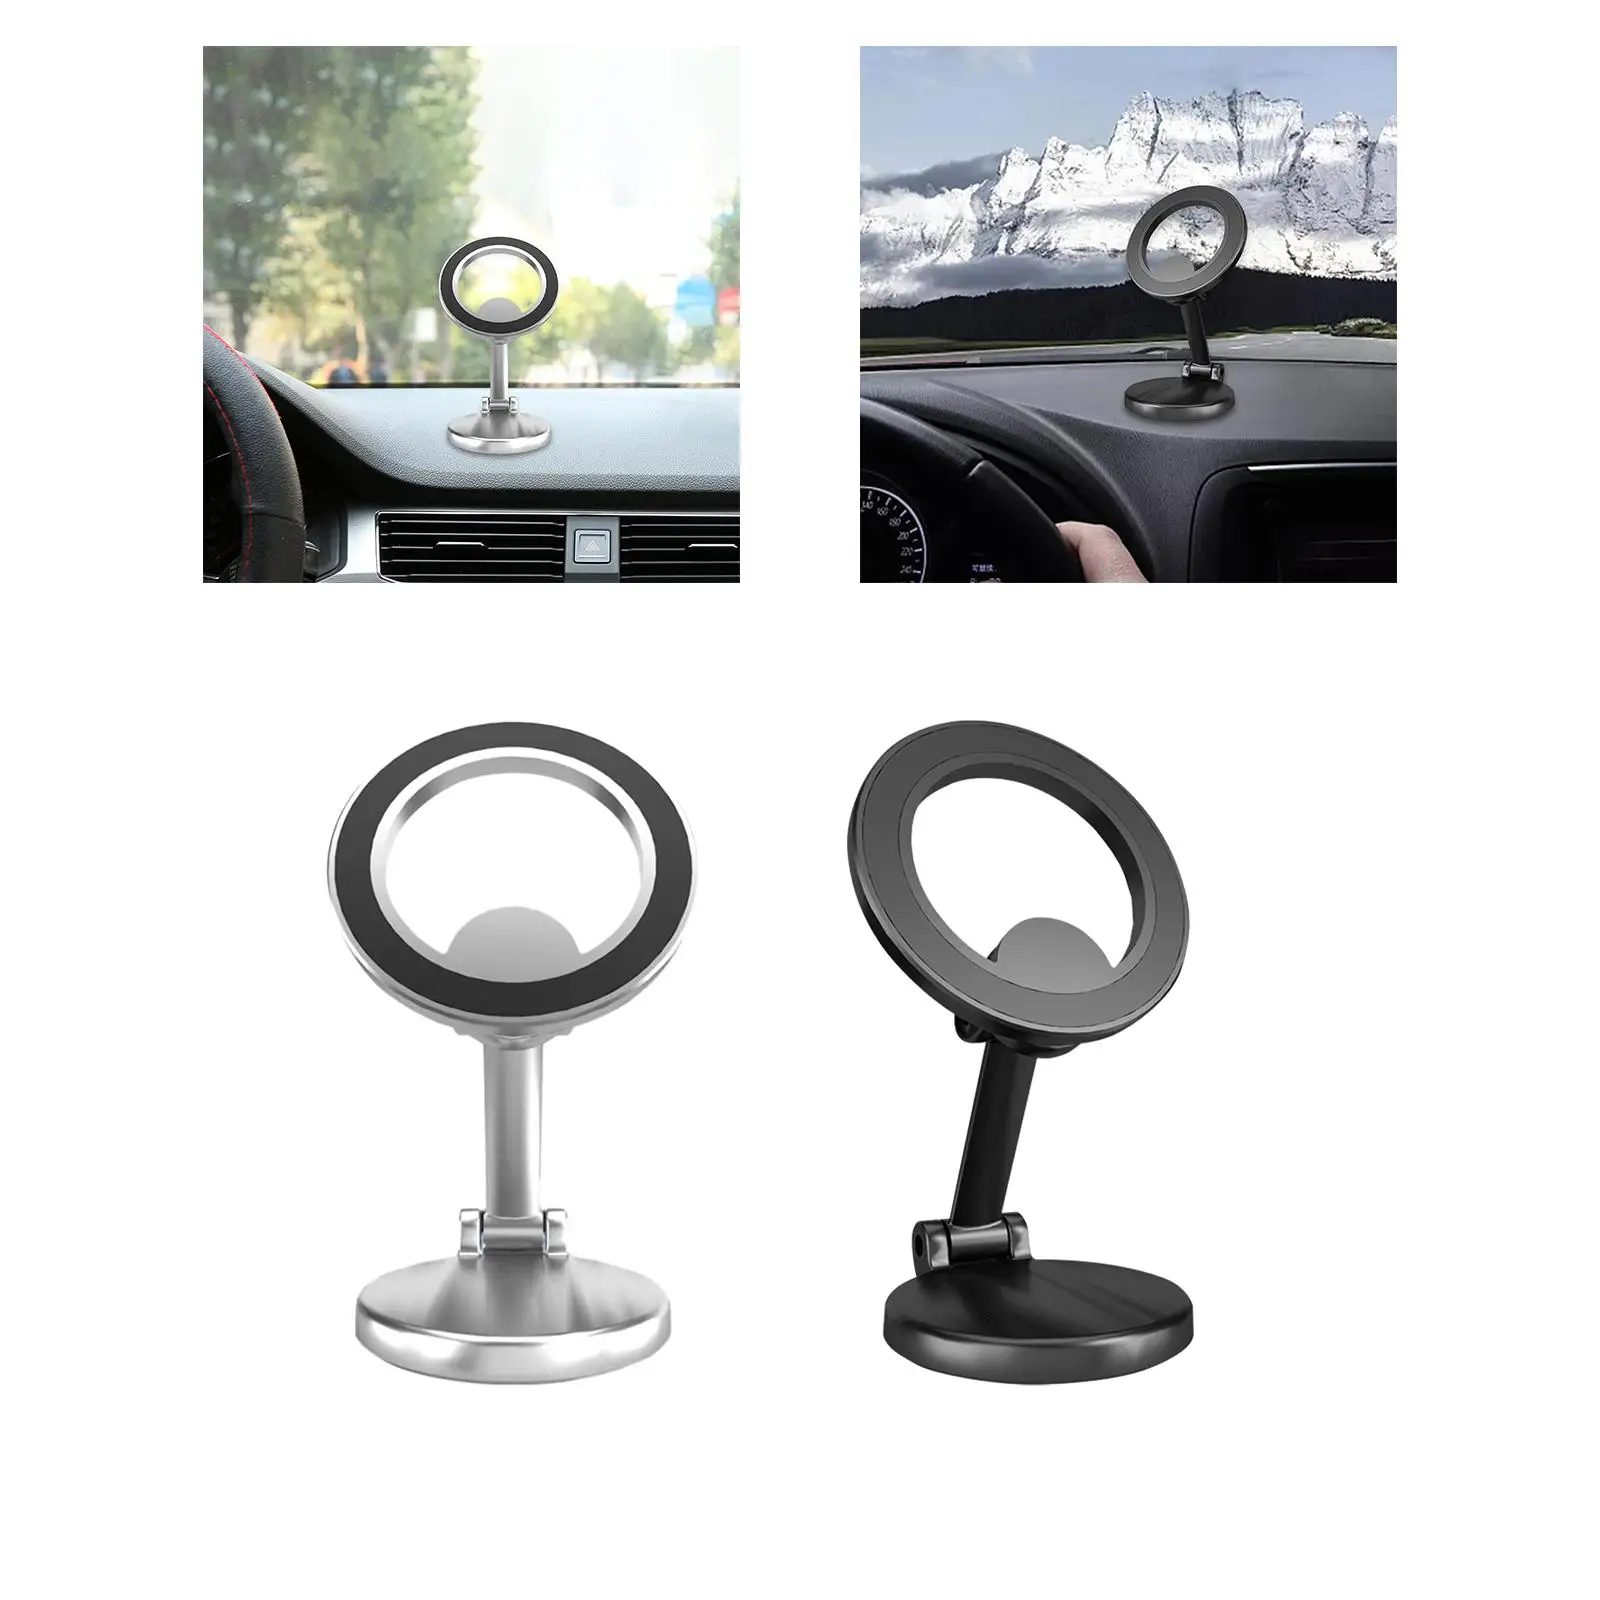 Magnetic Car Phone Mount Foldable Compact Fits Most Smartphones Universal with Metal Plates Automotive Accessories Phone Cradle